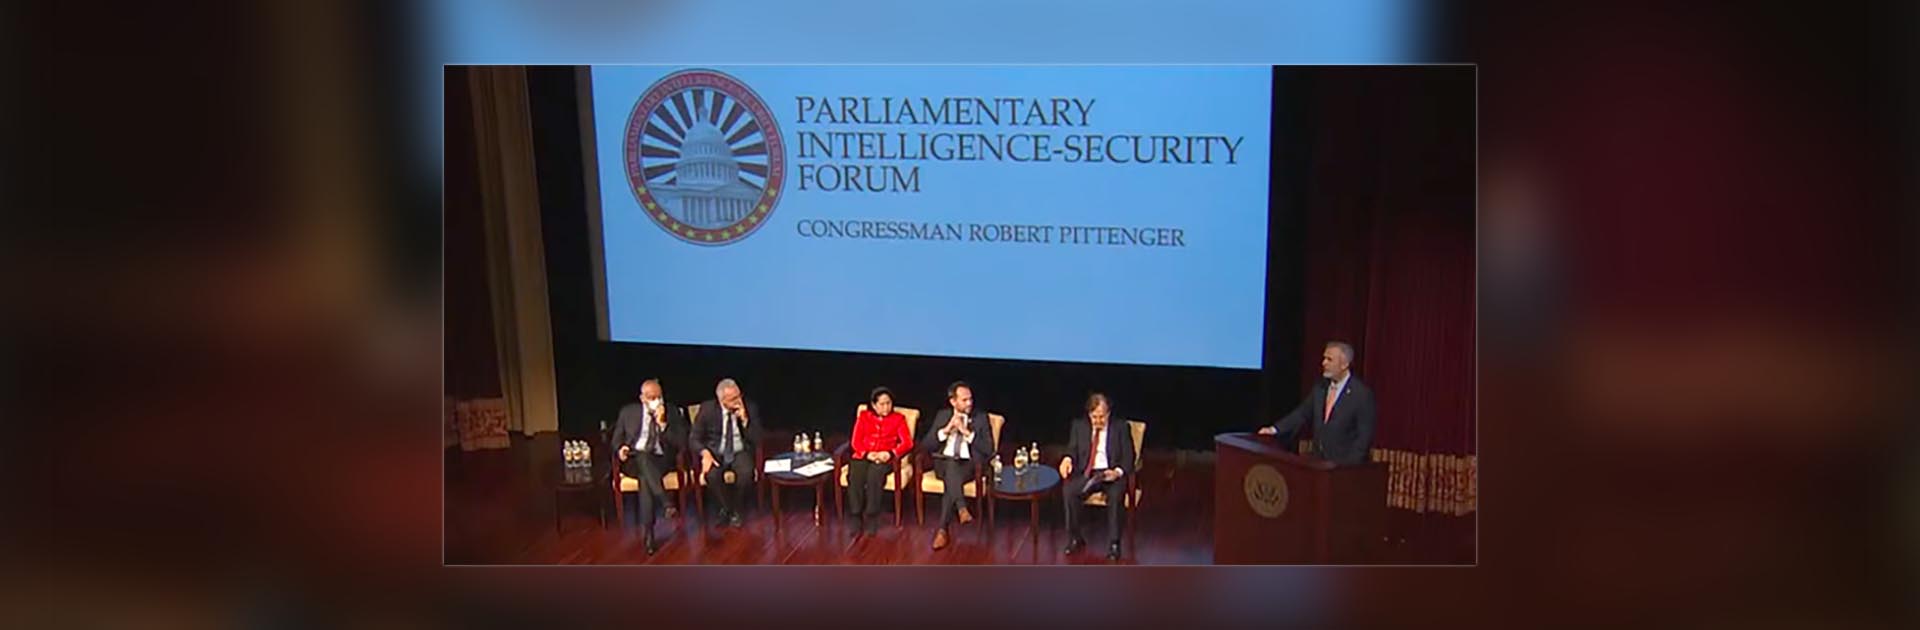 20th Parliamentary Intelligence-Security Forum